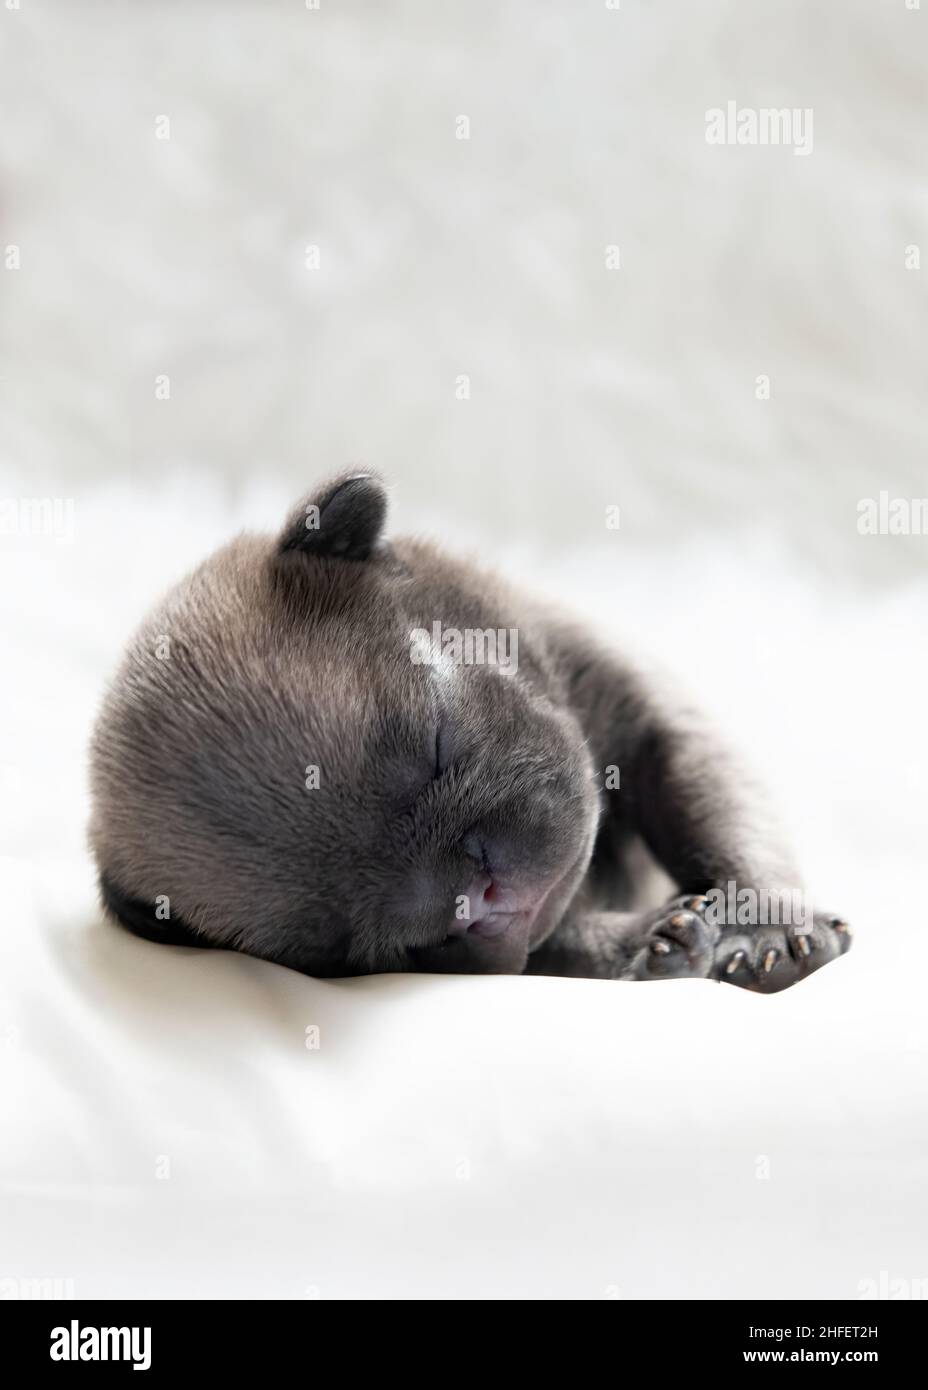 one week old french bulldog puppy, vertical image front focus on head ears eyes and nose tiny mouth slightly open. light background for copyspace Stock Photo